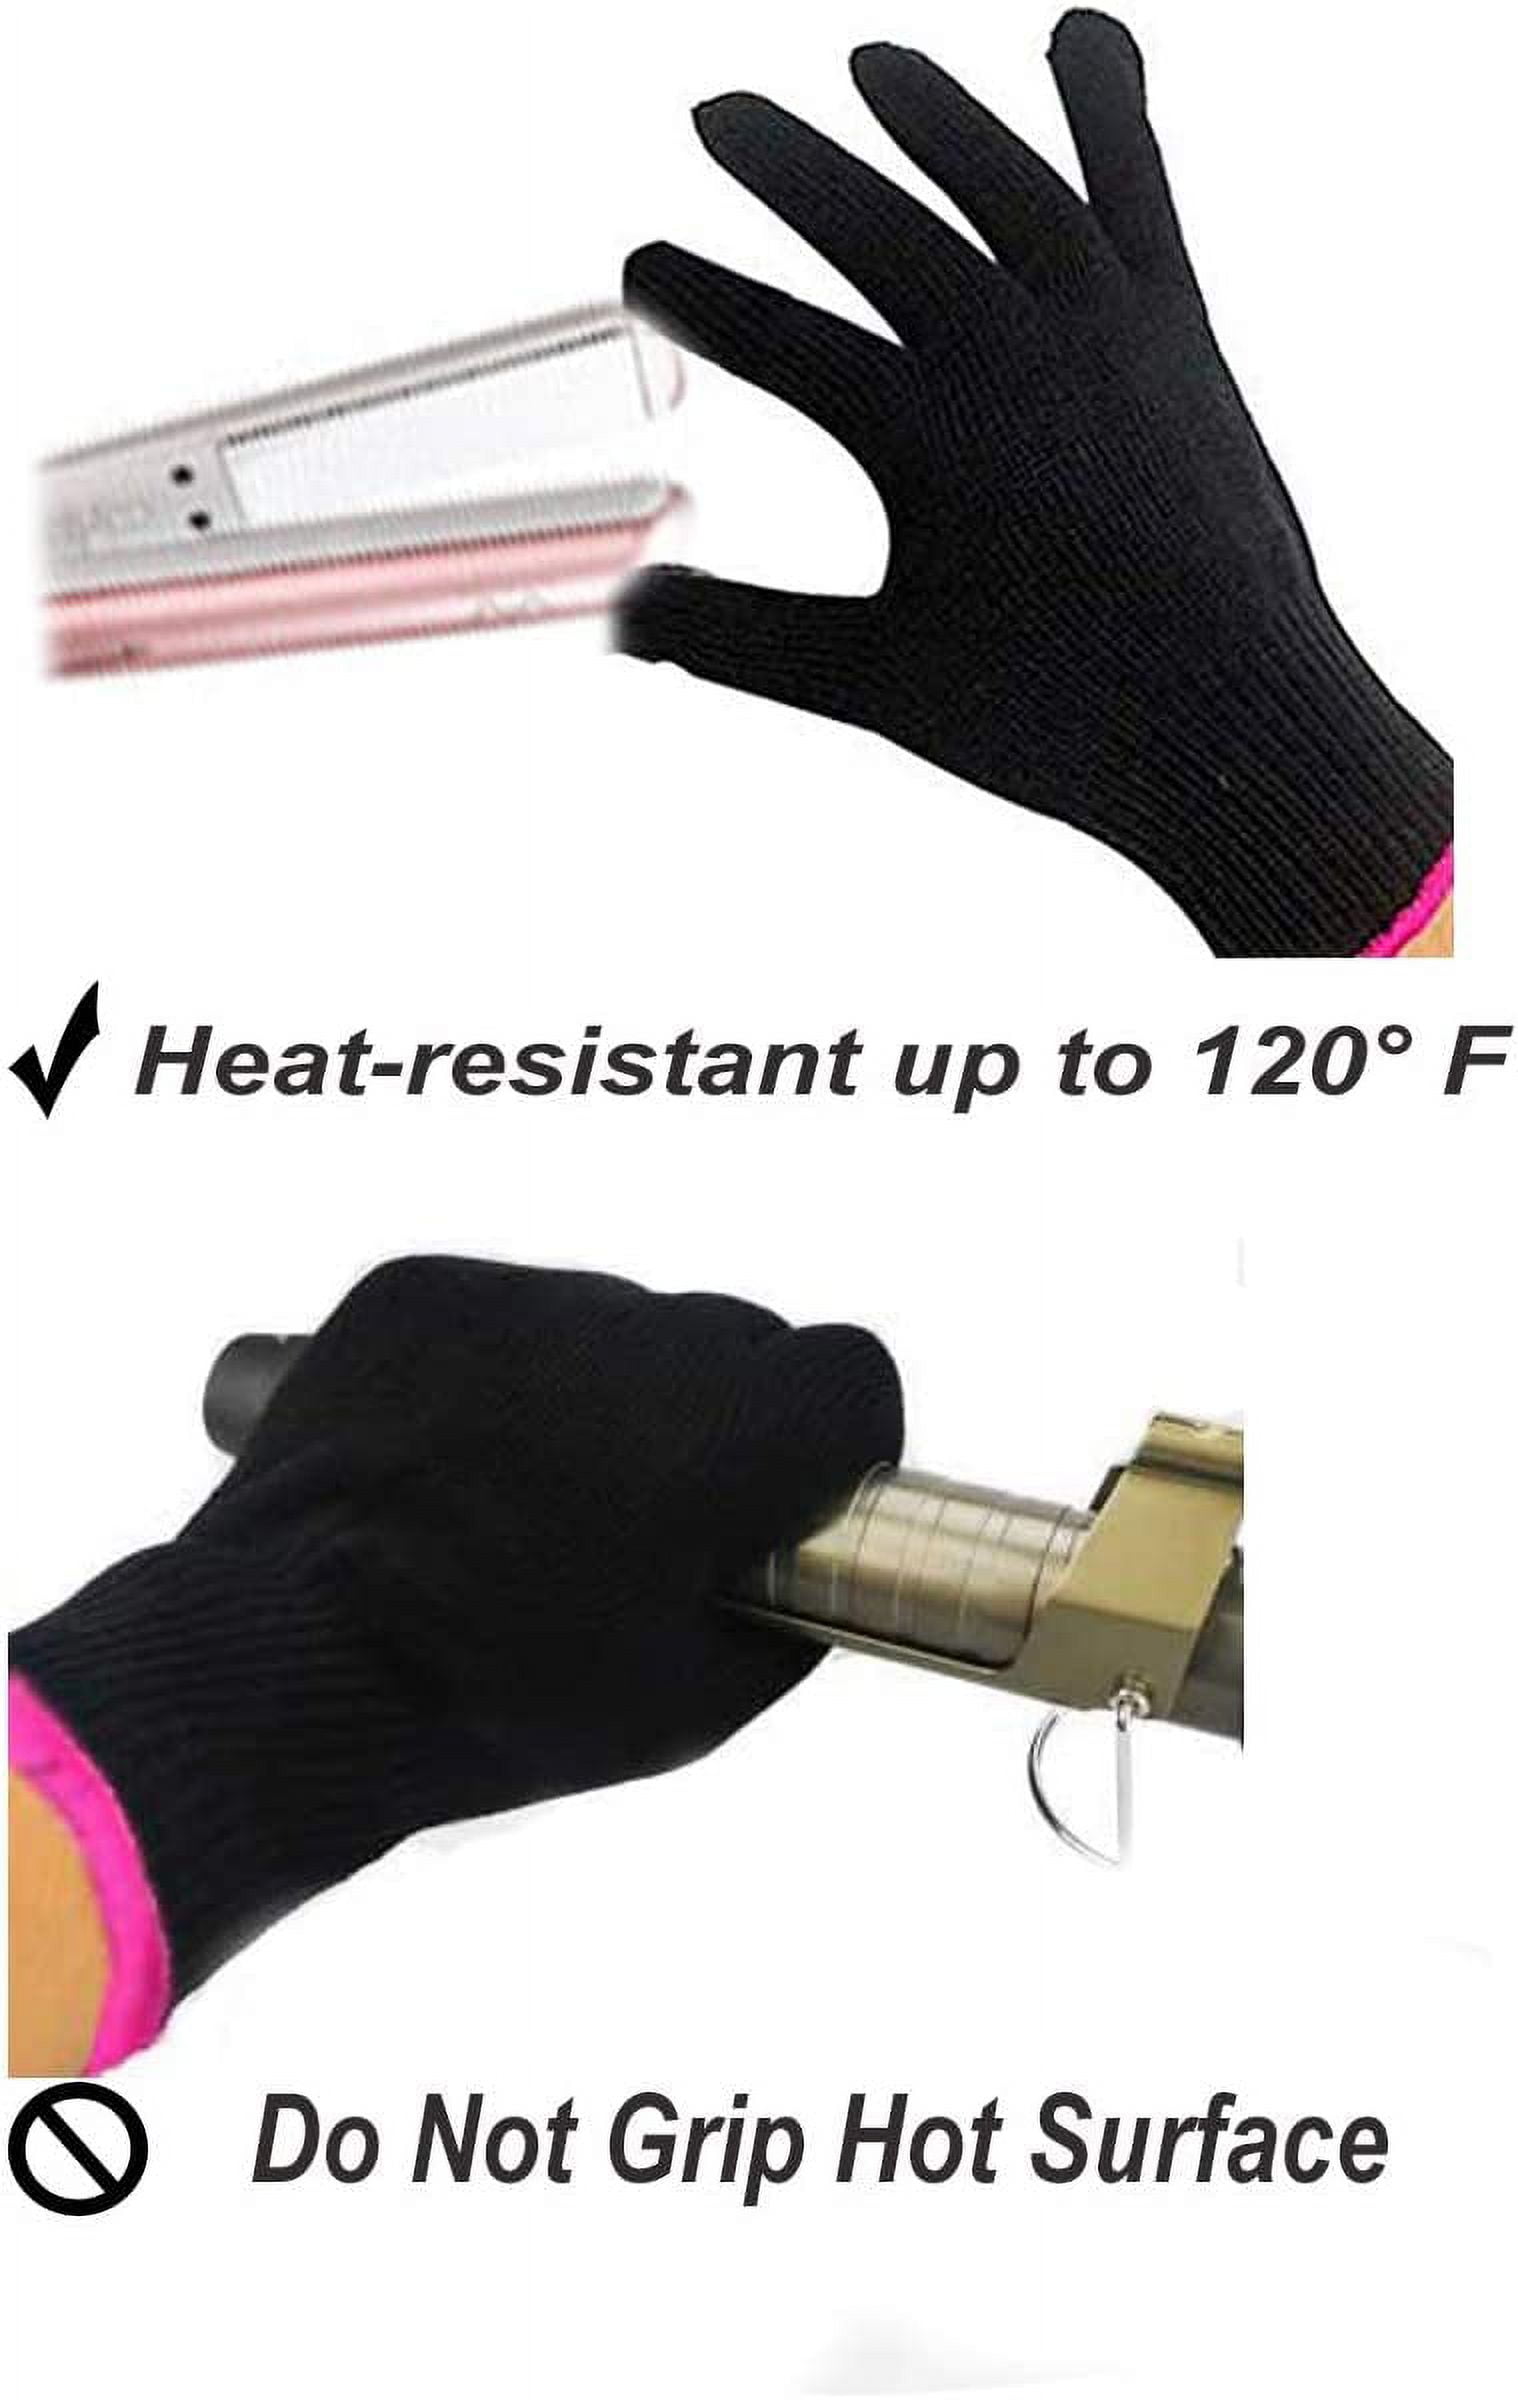 1 Set of 4Pcs Heat Resistant Gloves Silicone Bumps Heat Proof Glove Mitts  For Hair Styling Curling Iron (Black Red No Silicone) 